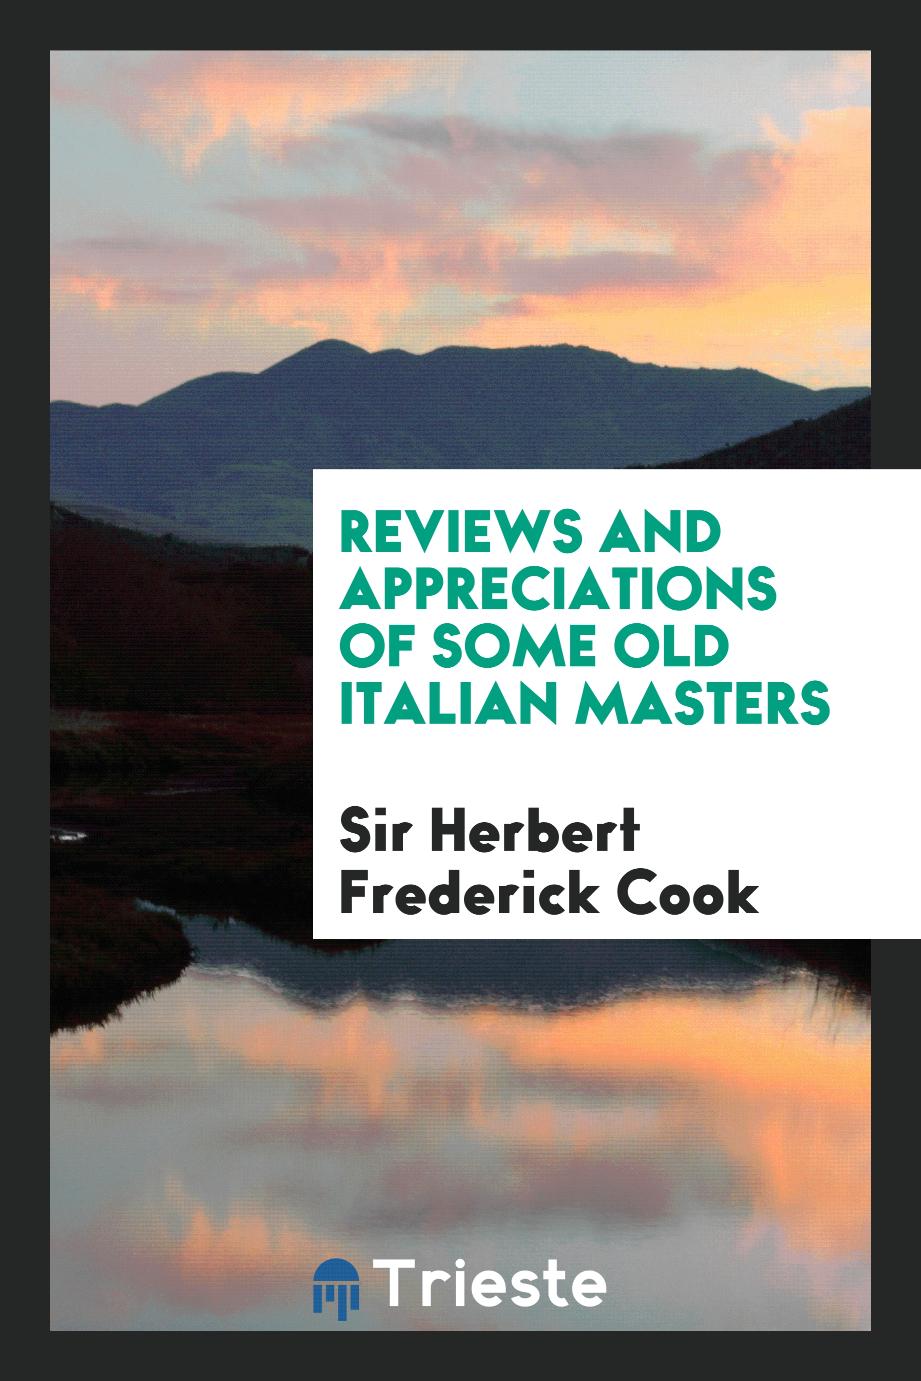 Reviews and appreciations of some old Italian masters